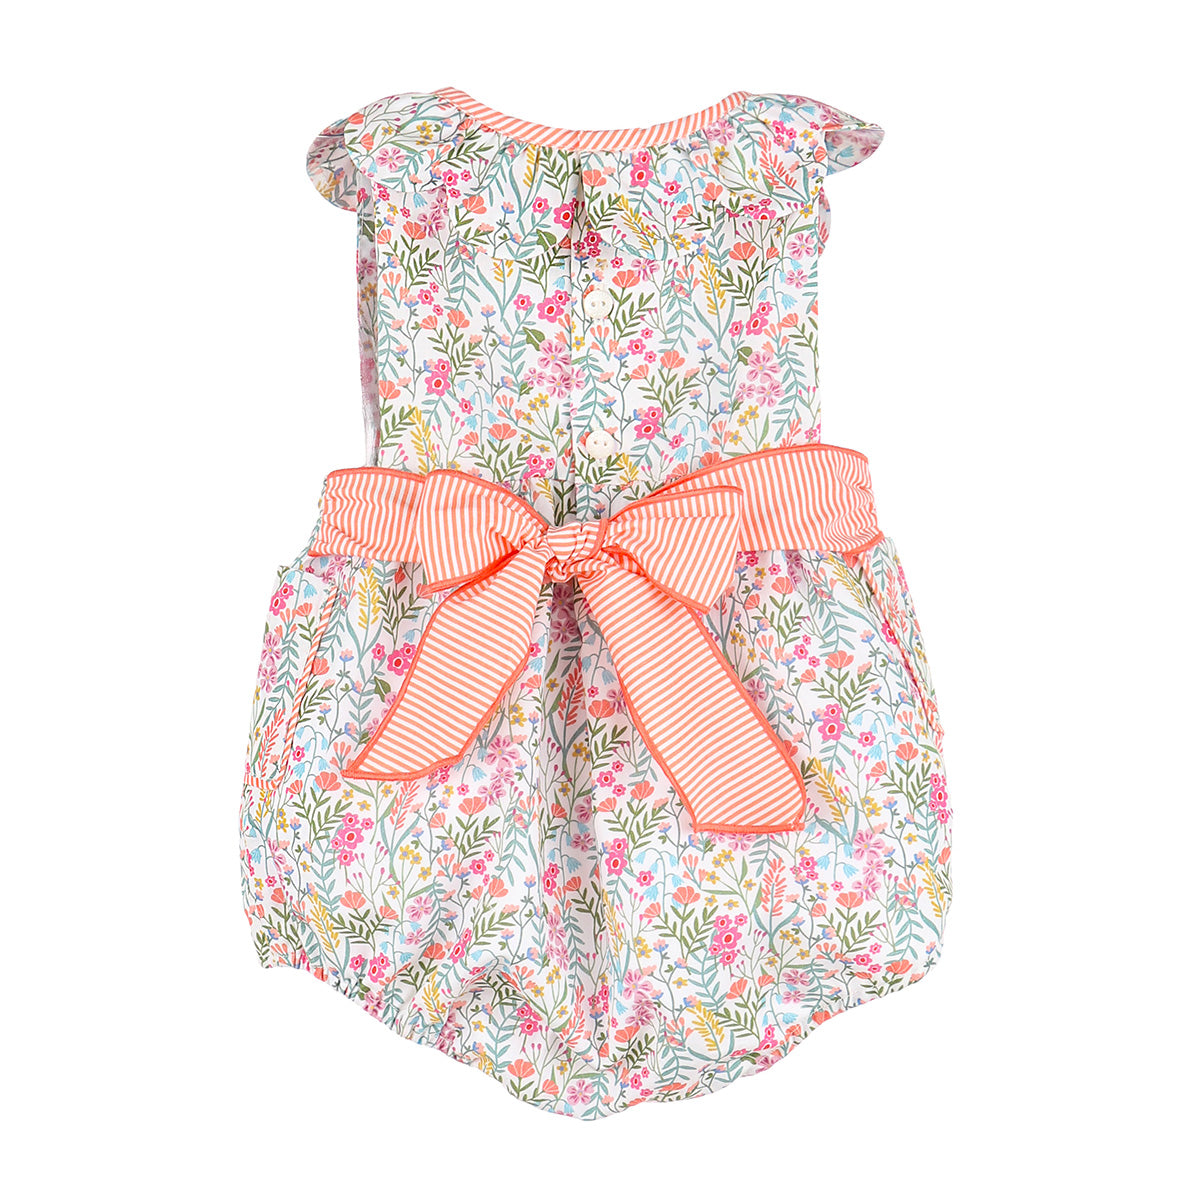 Baby Girl's Floral Print Sissy Ruffle Bubble by Sophie & Lucas